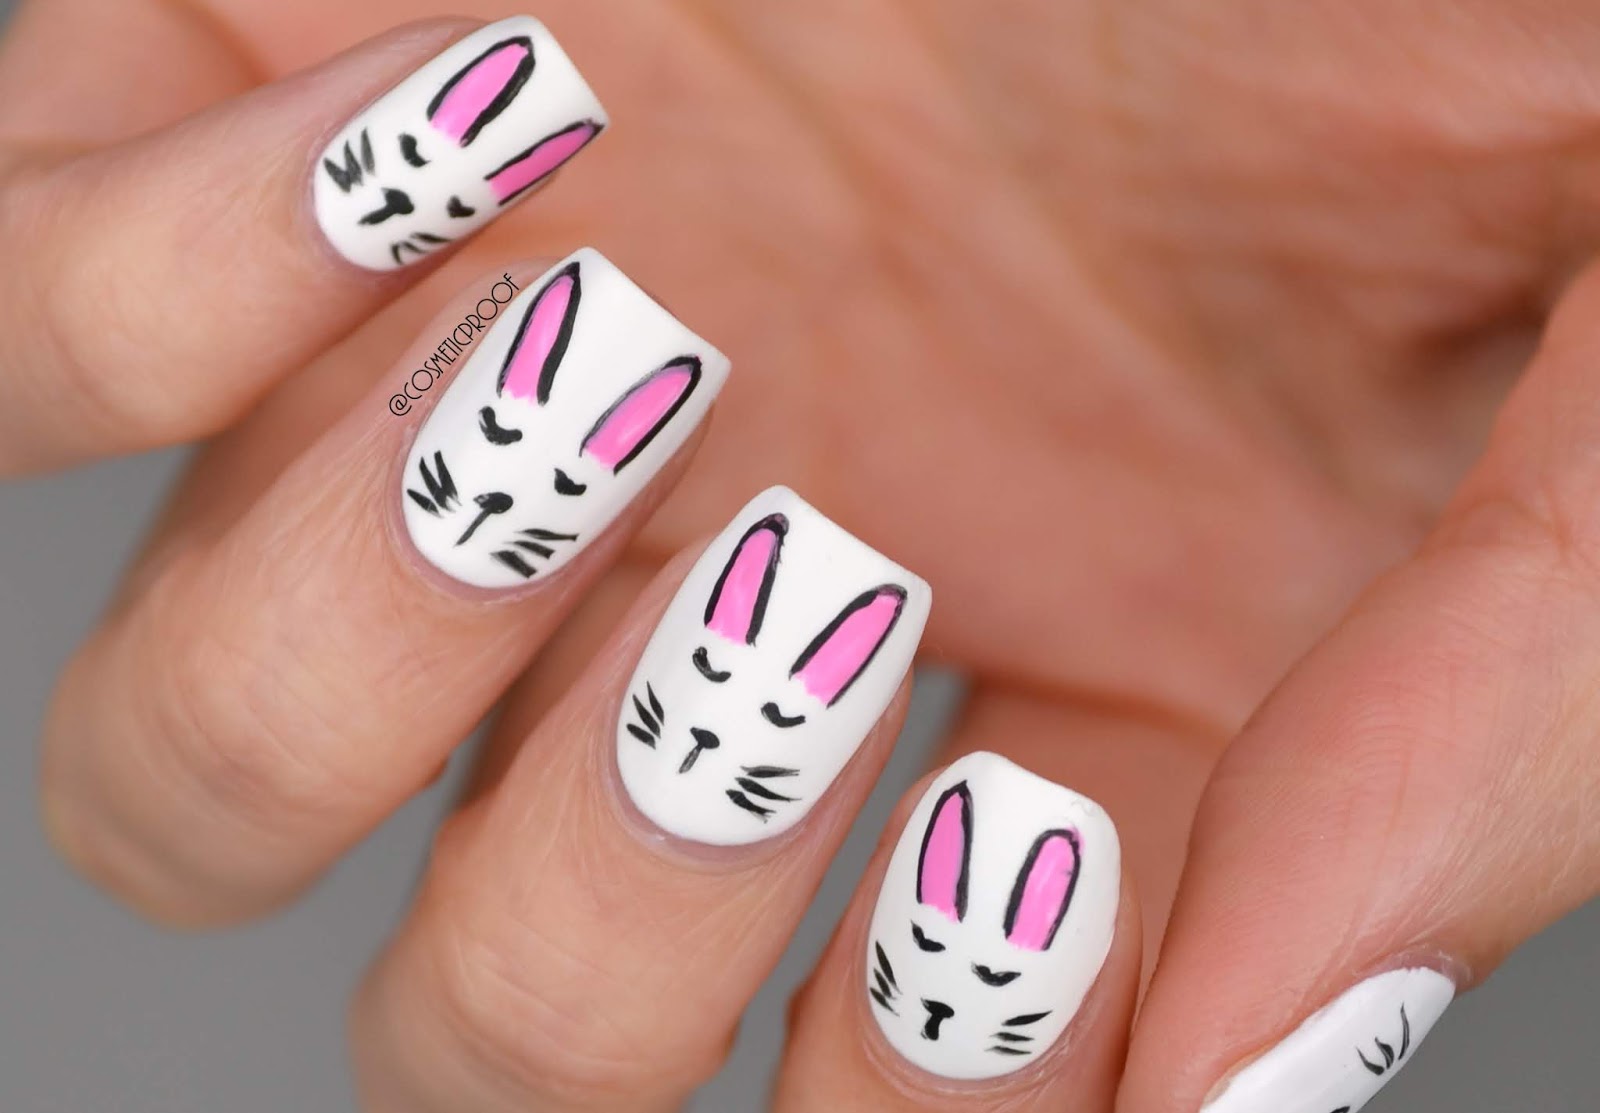 4. Snoopy Easter Bunny Nail Art - wide 6